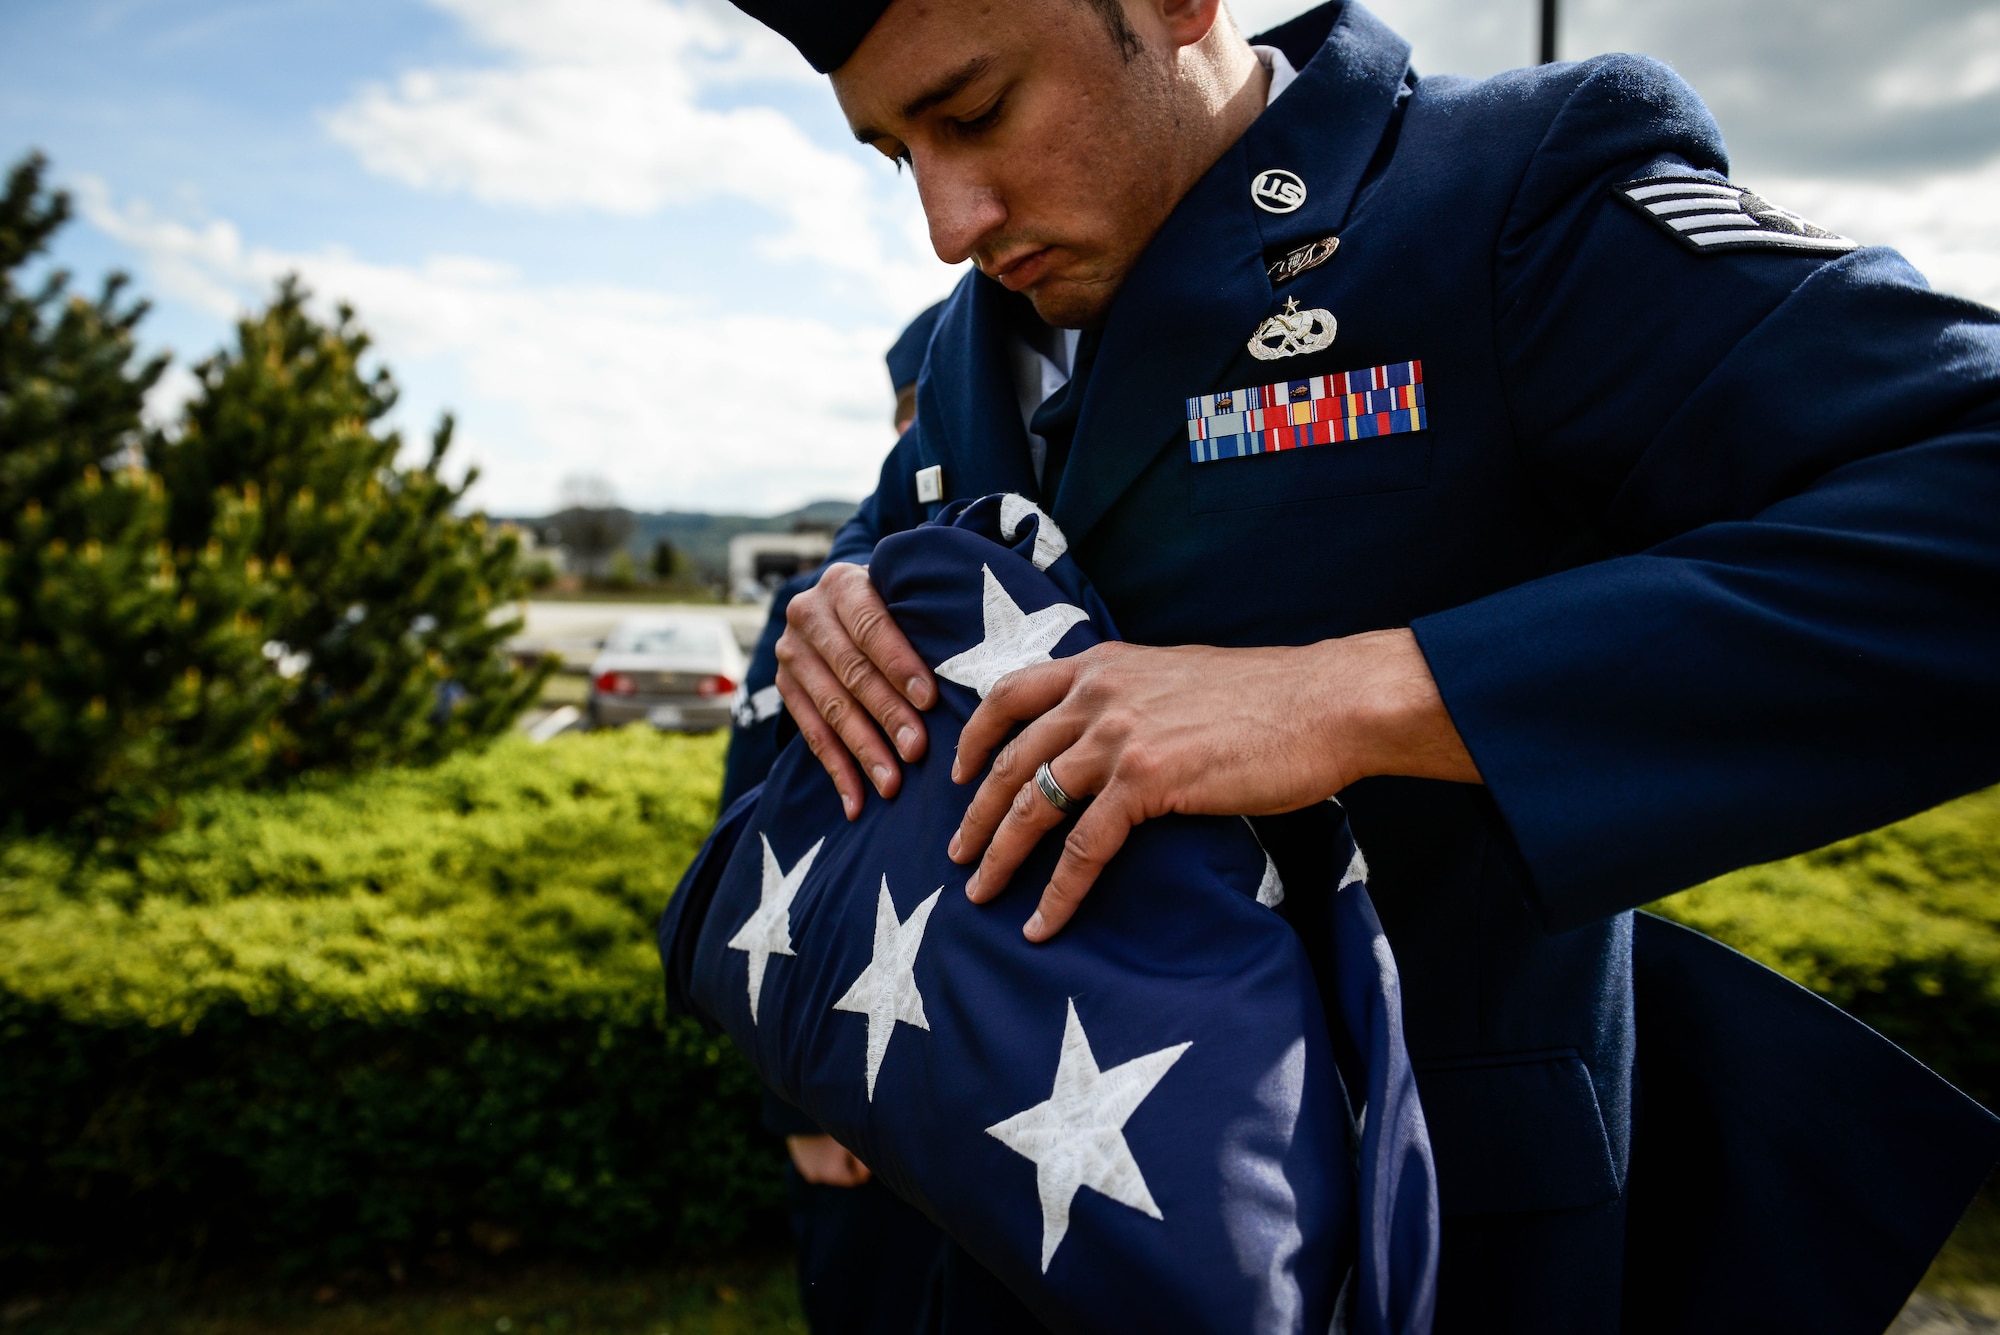 Staff Sgt. Joshua D. Baca, 86th Operations Support Squadron host aviation resource manager, folds the U.S. flag during a retreat and remembrance ceremony April 29, 2016, at Ramstein Air Base, Germany.  Airmen from the 86th Operations Group gathered for the ceremony to recognize the Implementation Force 21 crew from the 76th Airlift Squadron who gave the ultimate sacrifice 20 years ago when their aircraft was lost during an approach into Dubrovnik, Croatia. (U.S. Air Force photo/Senior Airman Nicole Keim)